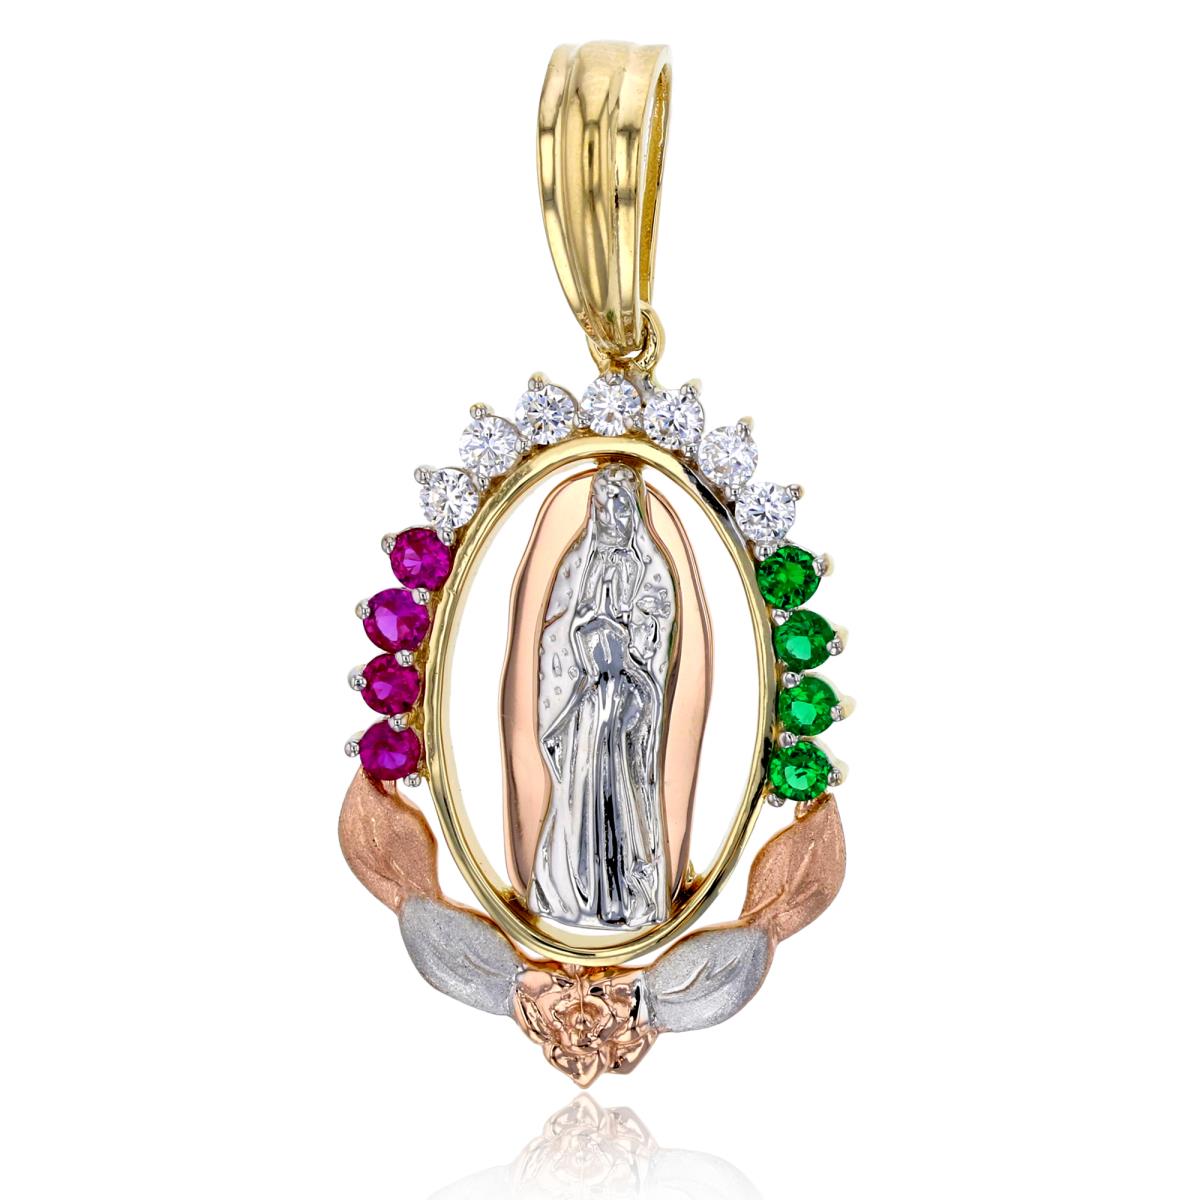 14K Gold Tricolor 45x21mm Virgin Mary Ruby Emerald White Pendant